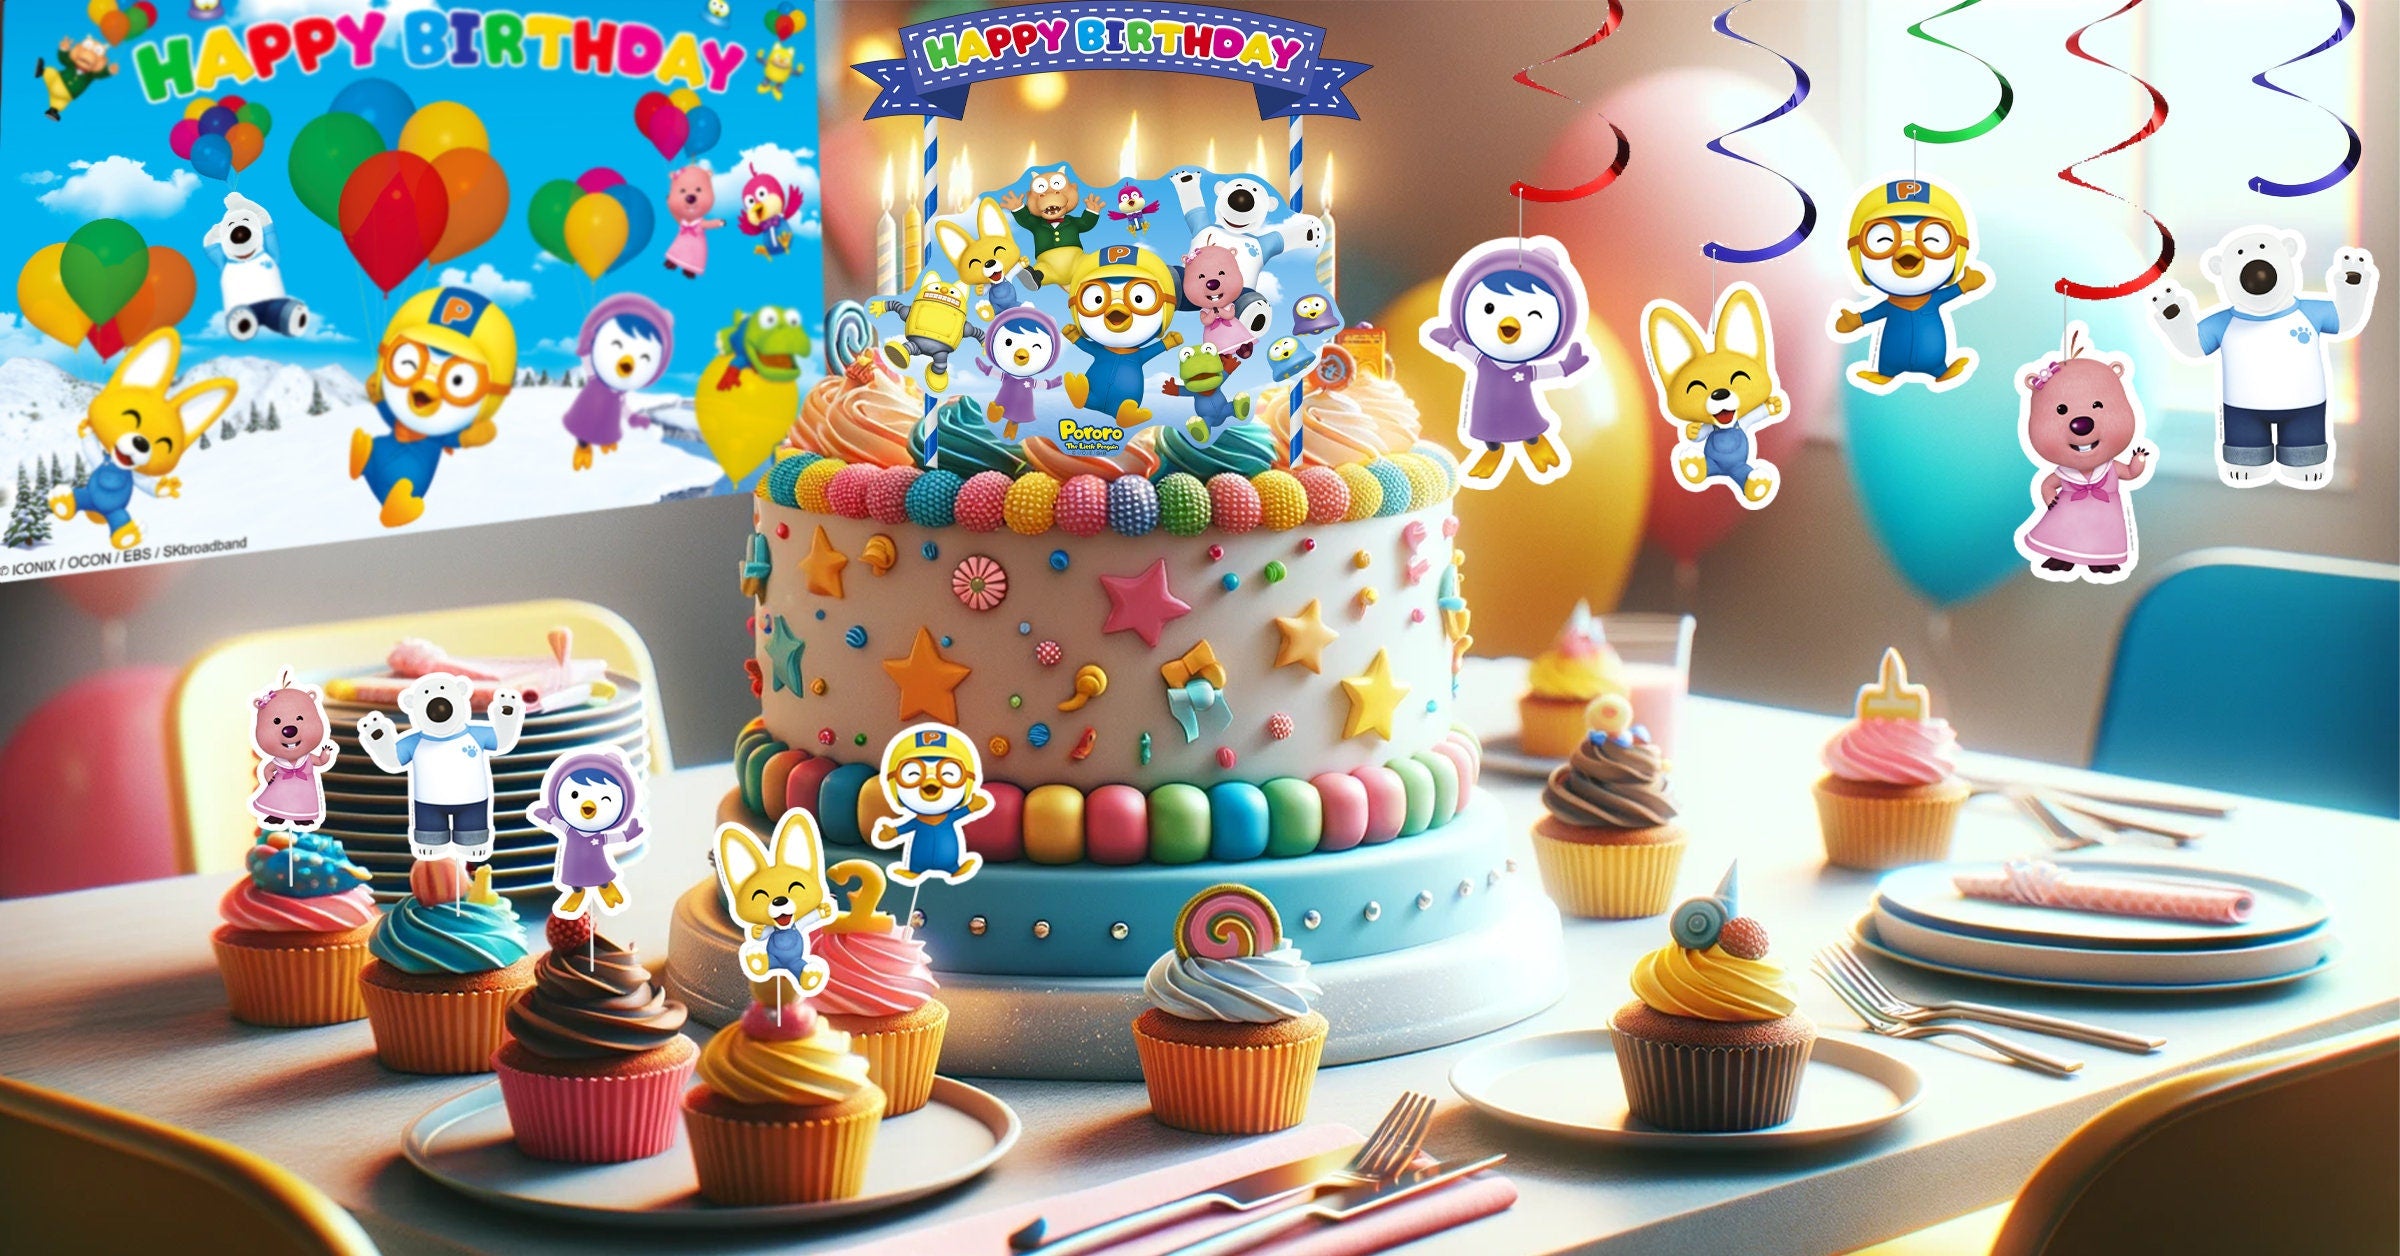 Pororo & Friends Cheerful Party Banner - Perfect for Kids' Birthday Celebrations and Events